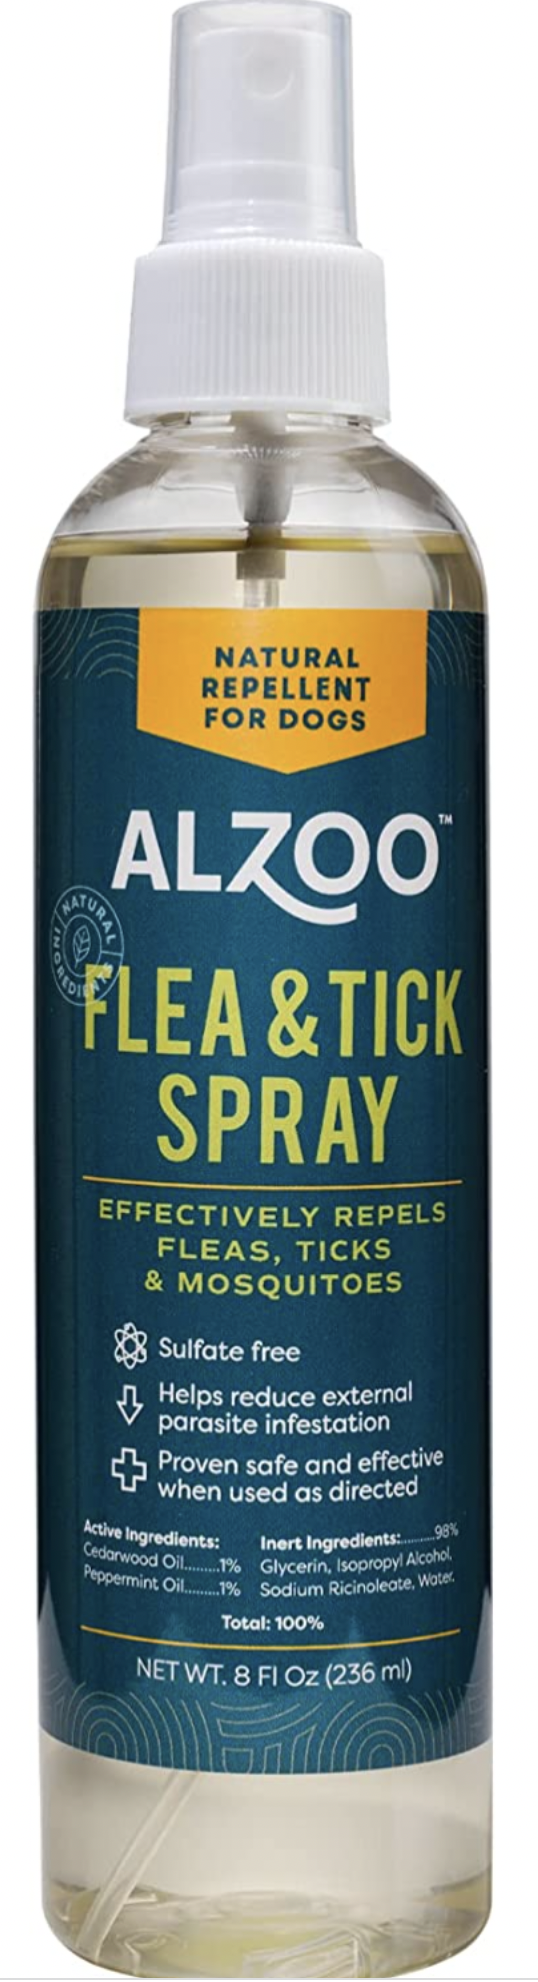 Clear bottle with blue/green label filled with Alzoo Flea and Tick Natural Repellent for Dogs Spray 8oz.